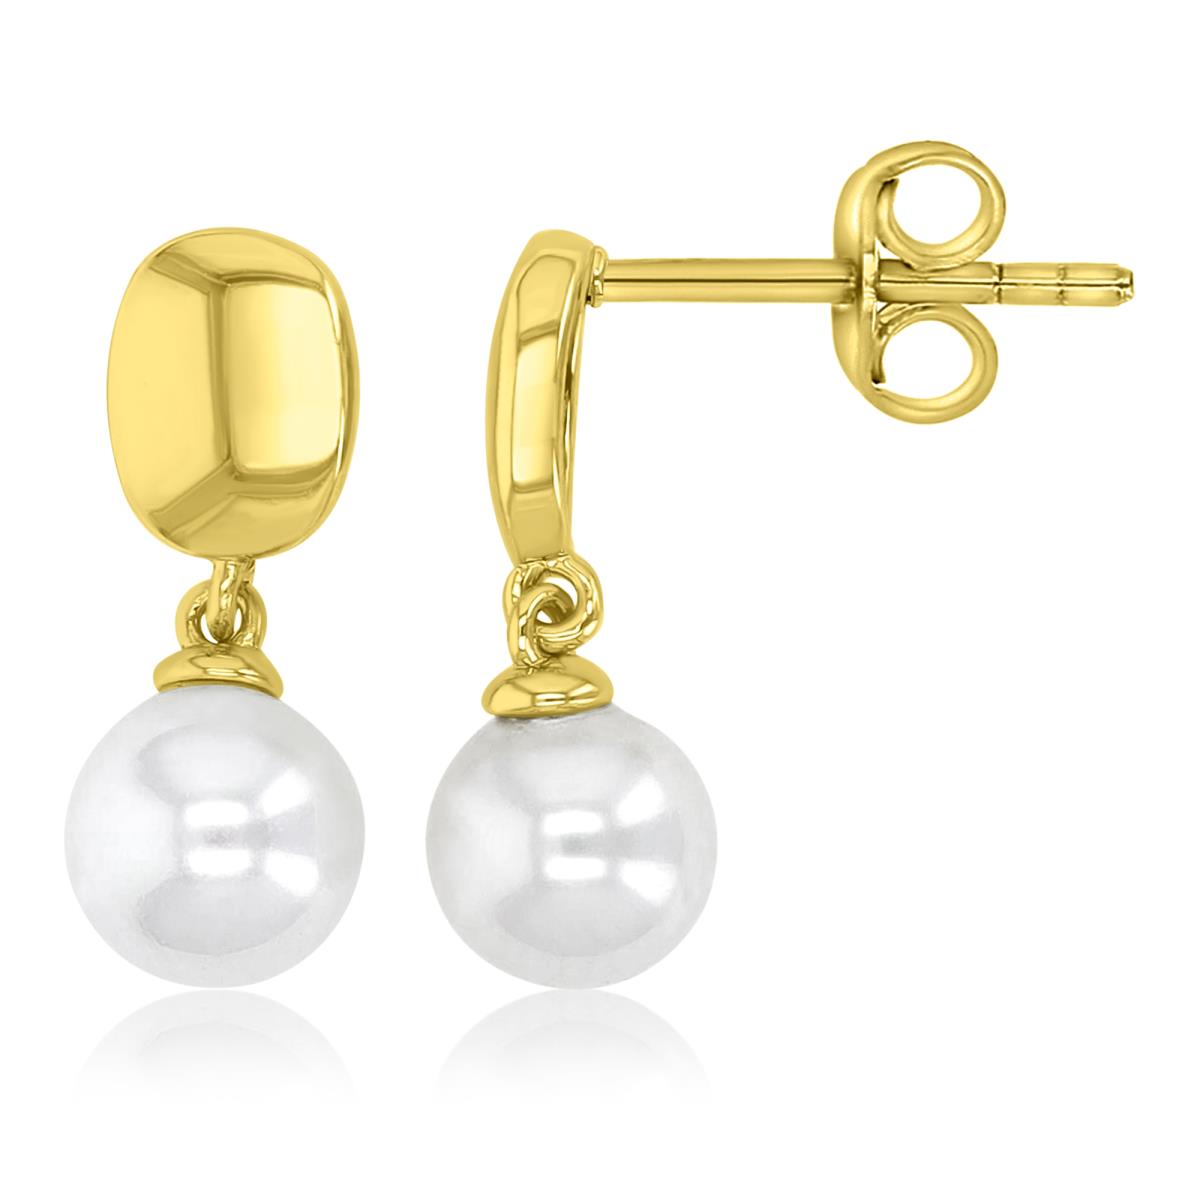 Sterling Silver Yellow 18mm Oval Stud & Simulated Pearl Drop Earrings